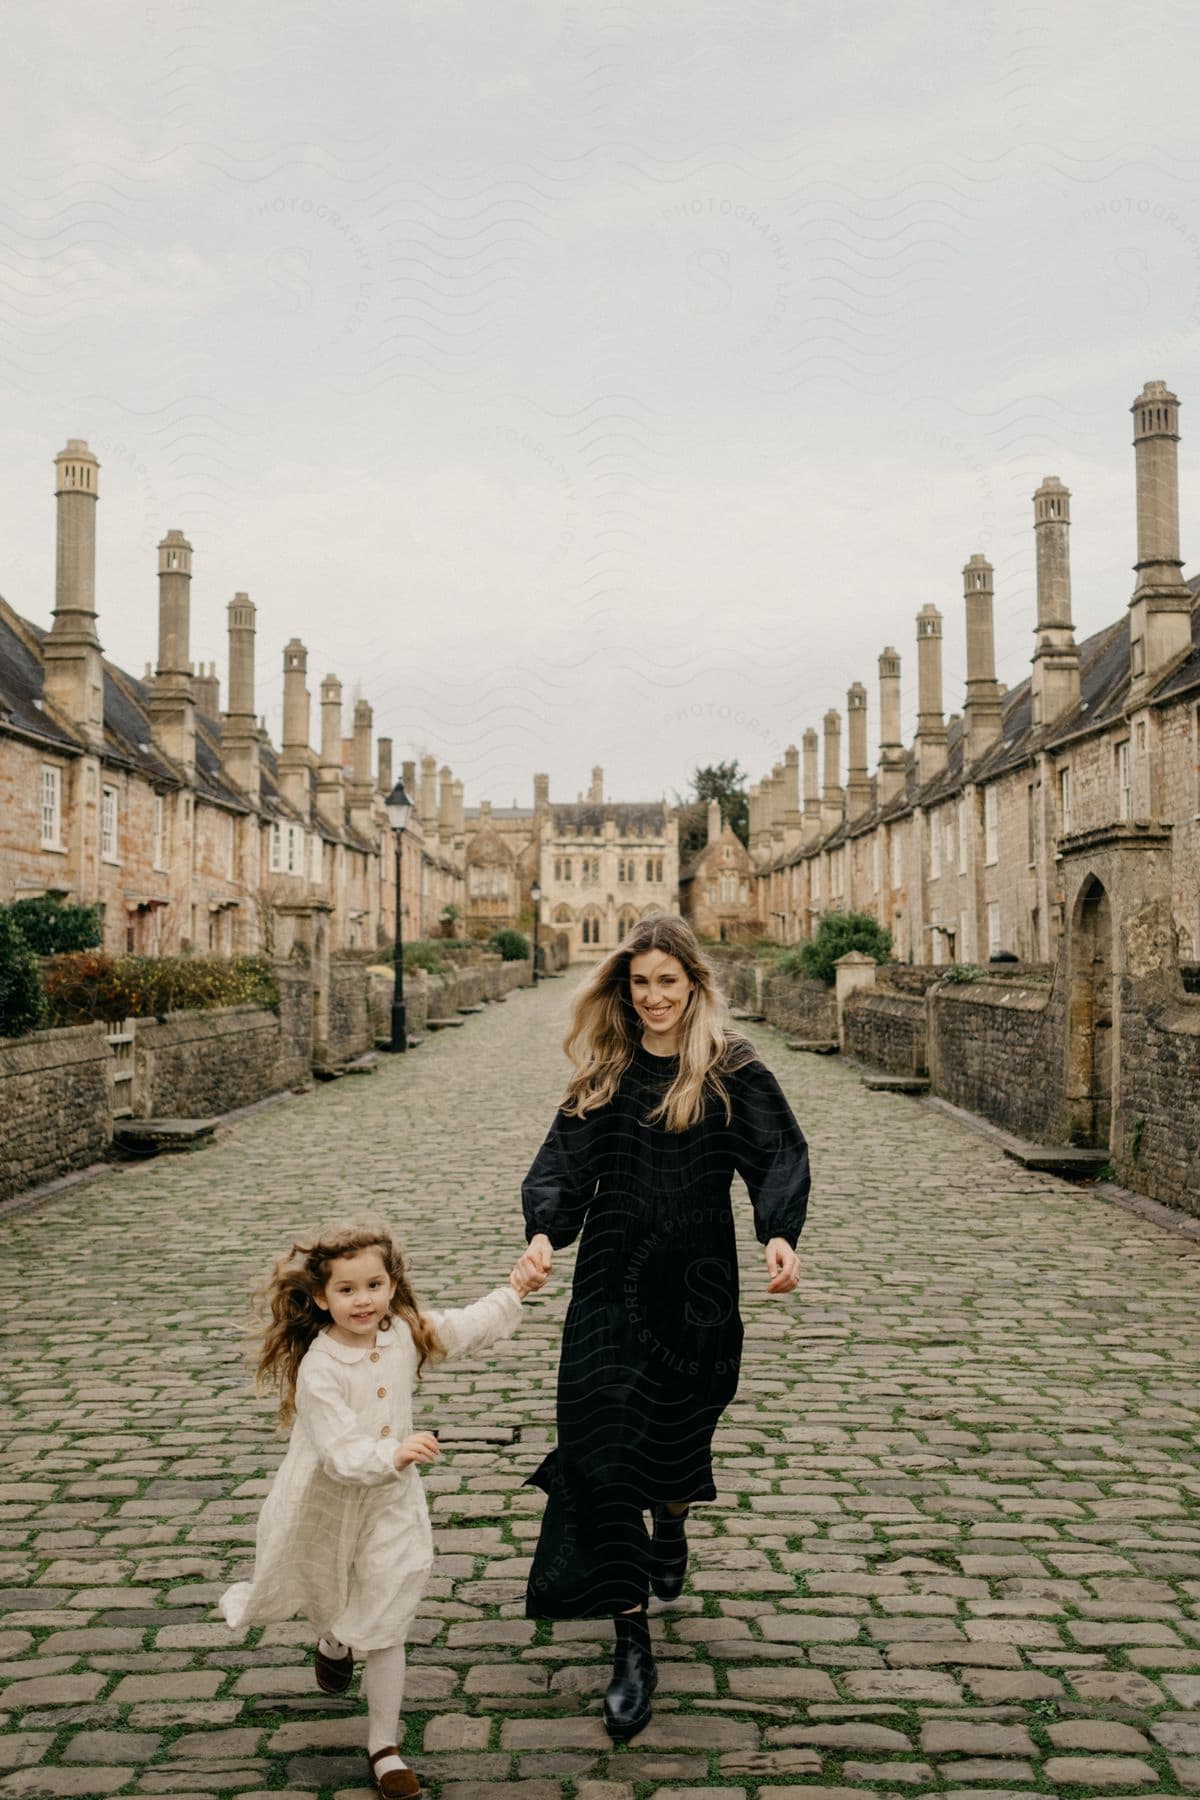 A mother and daughter walking on a stone path alongside several old residences.